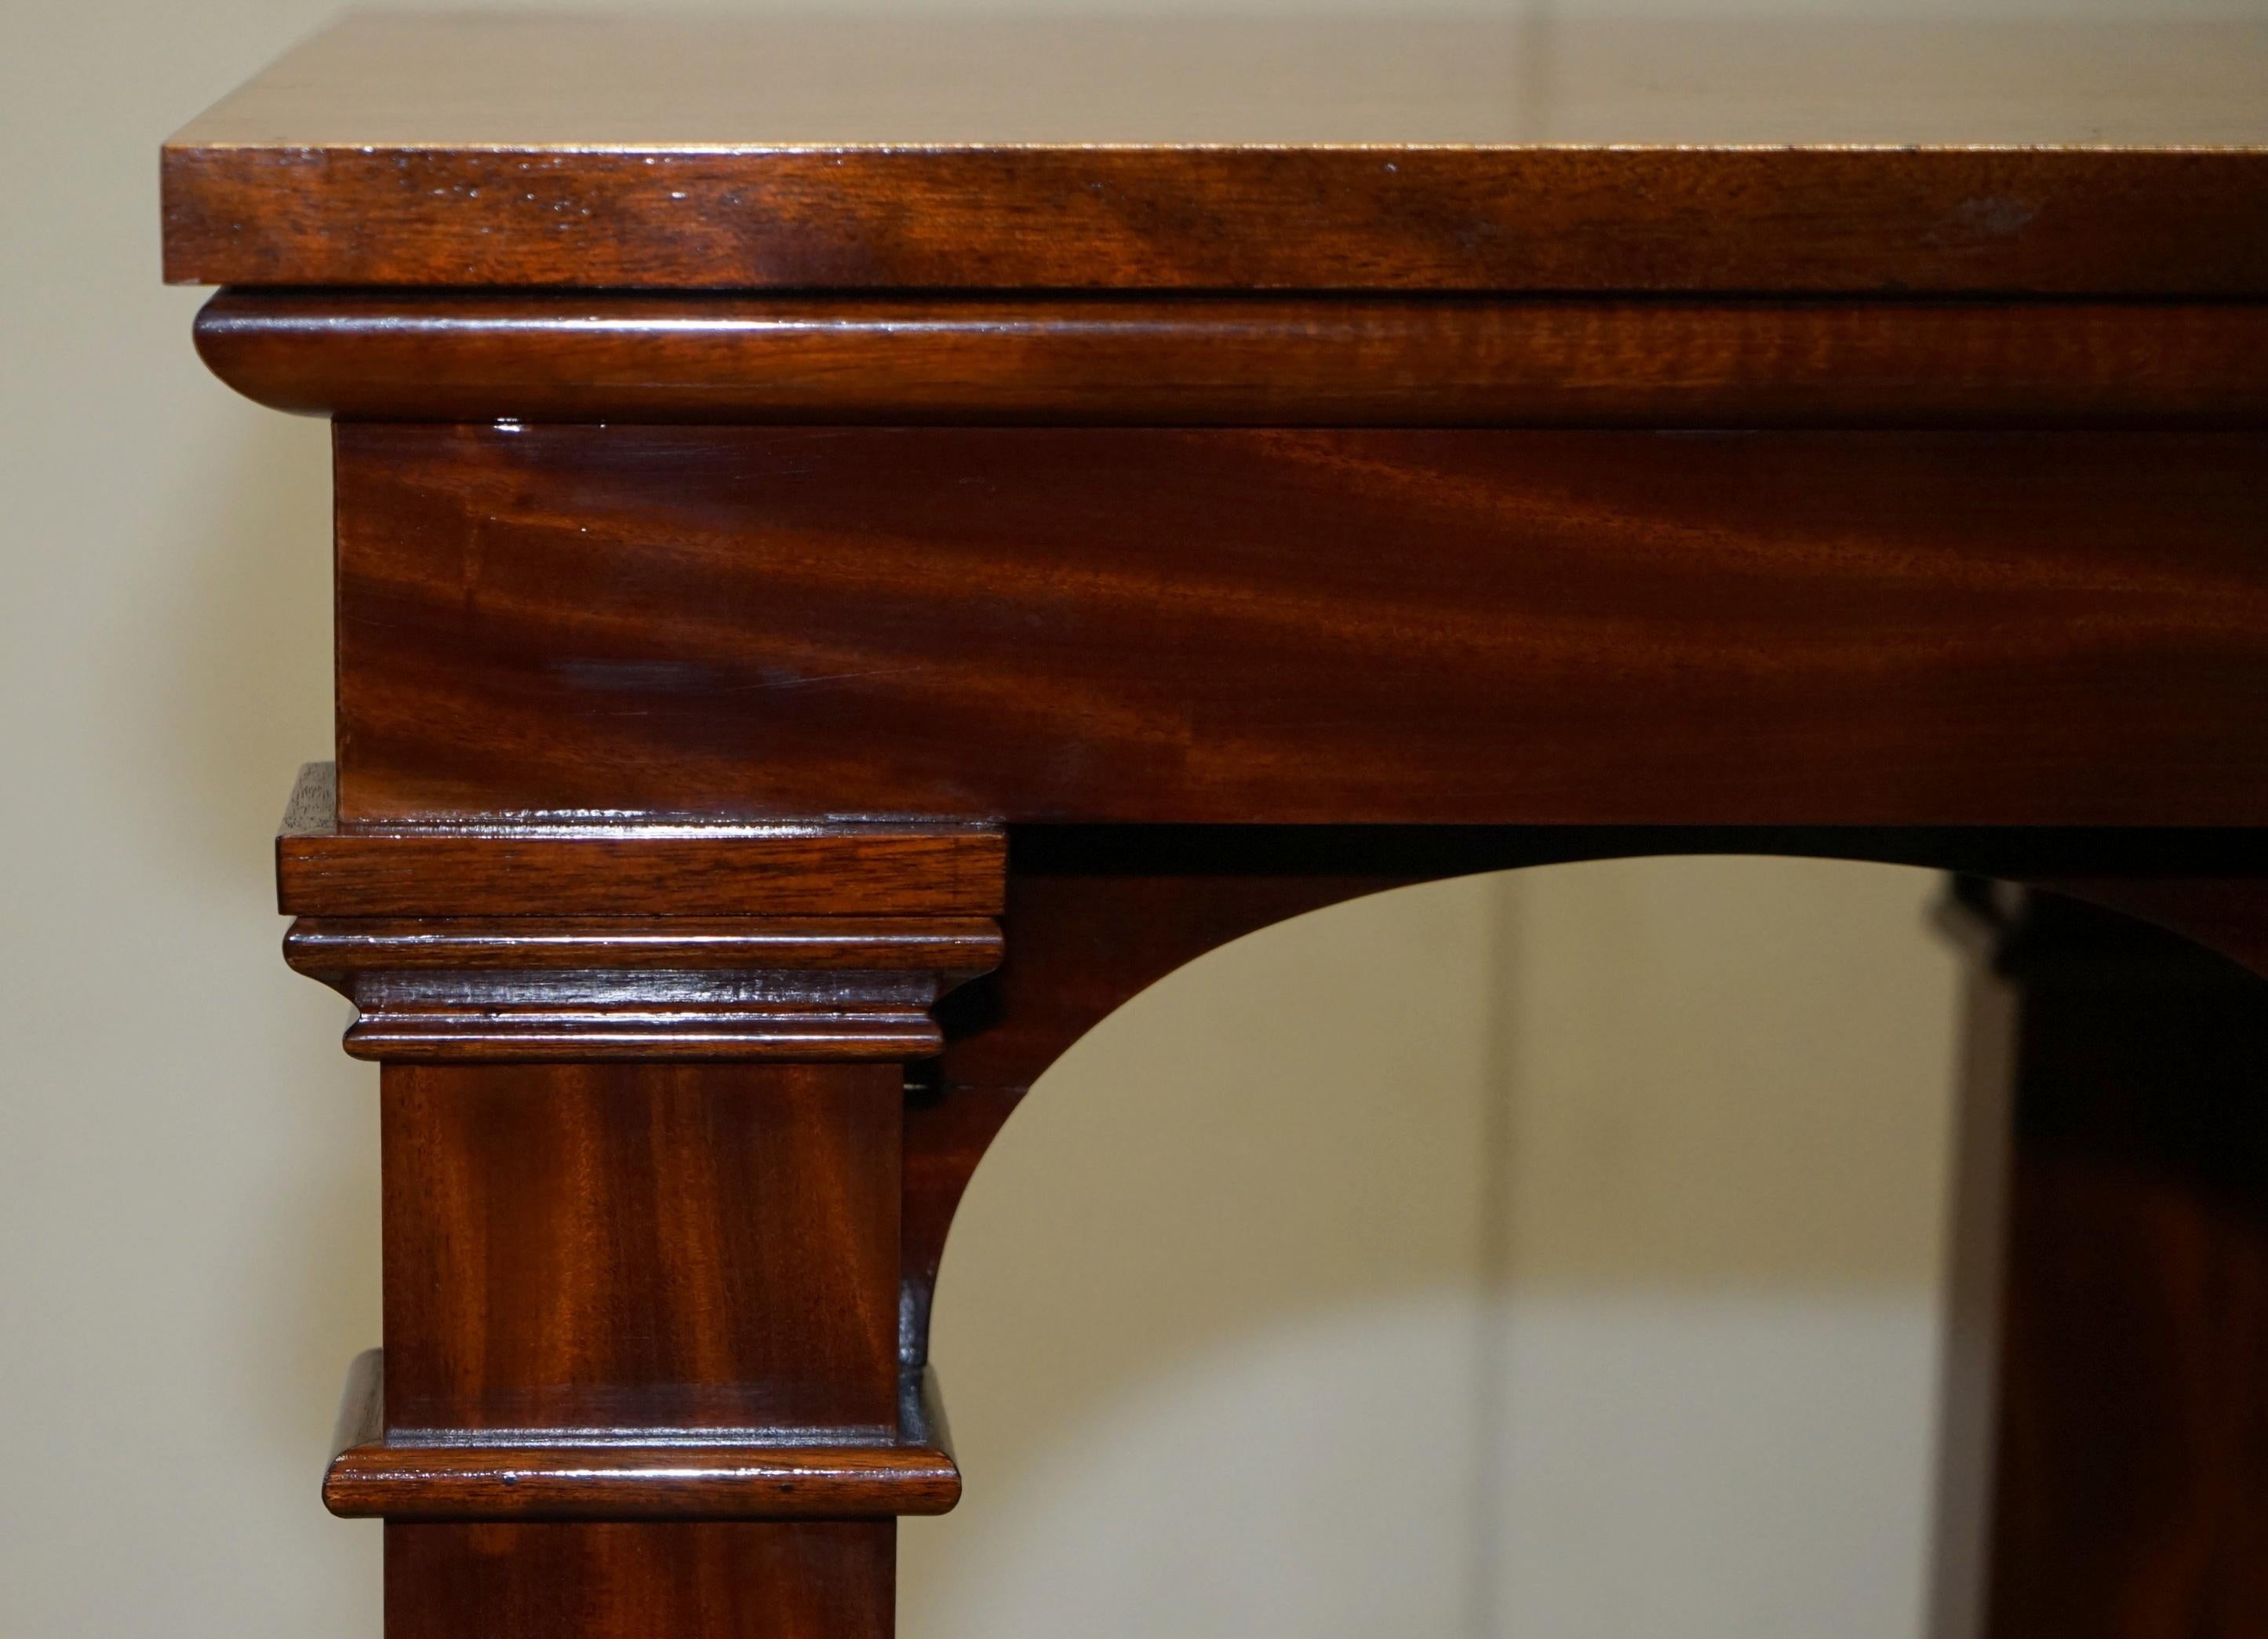 Mid-19th Century Antique Flamed Hardwood Pedestal from Princess Diana's Family Home Spencer House For Sale